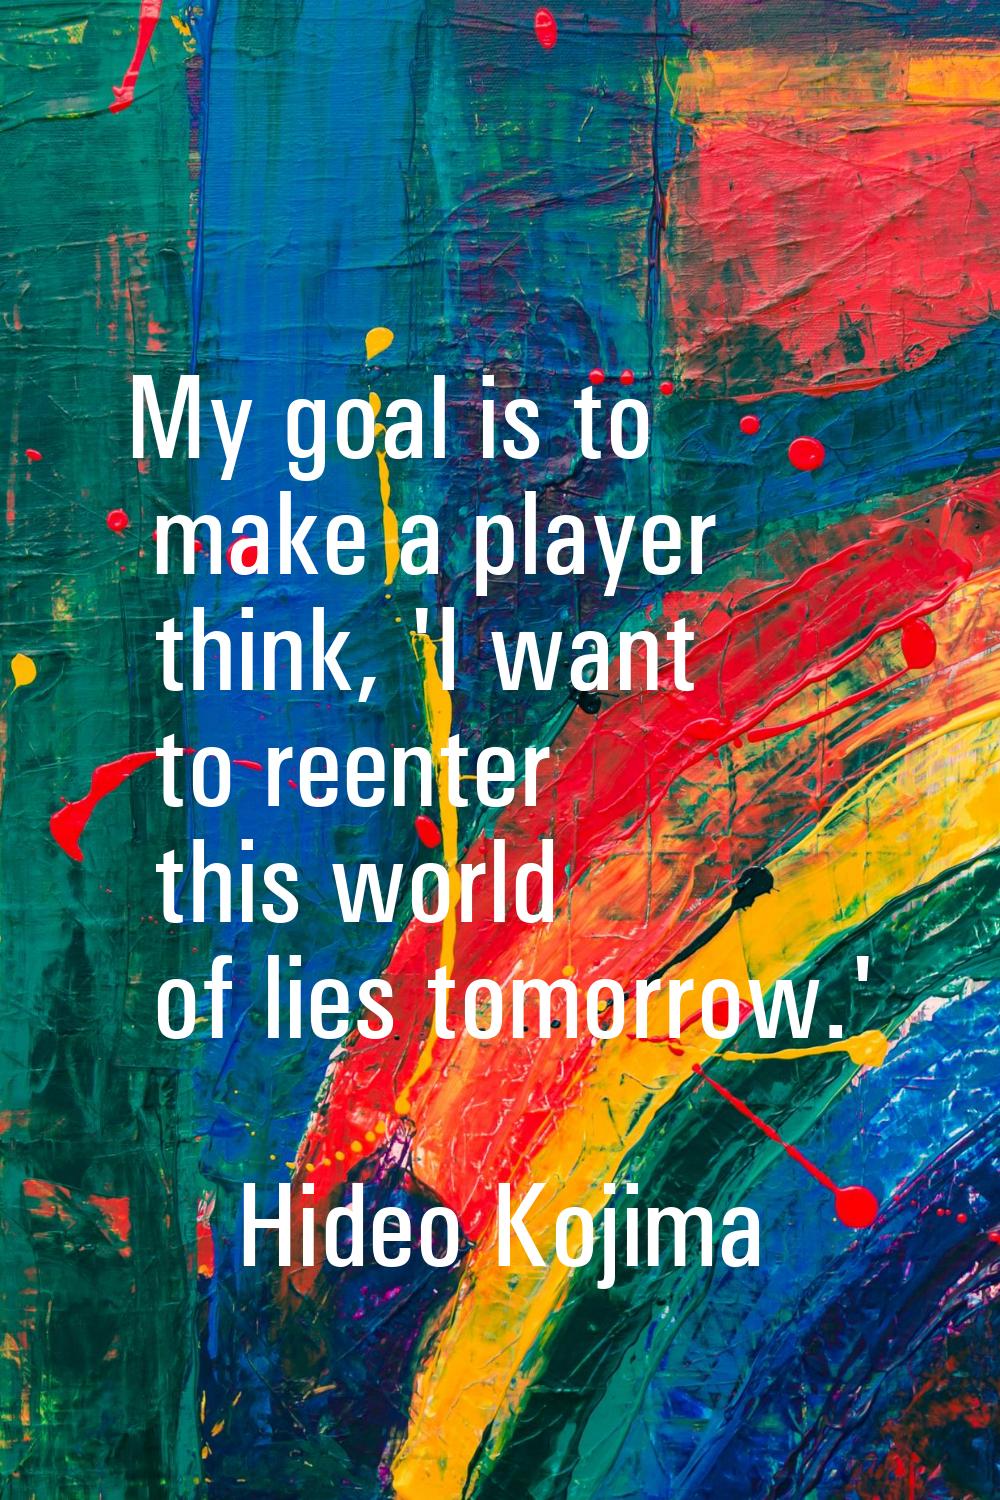 My goal is to make a player think, 'I want to reenter this world of lies tomorrow.'